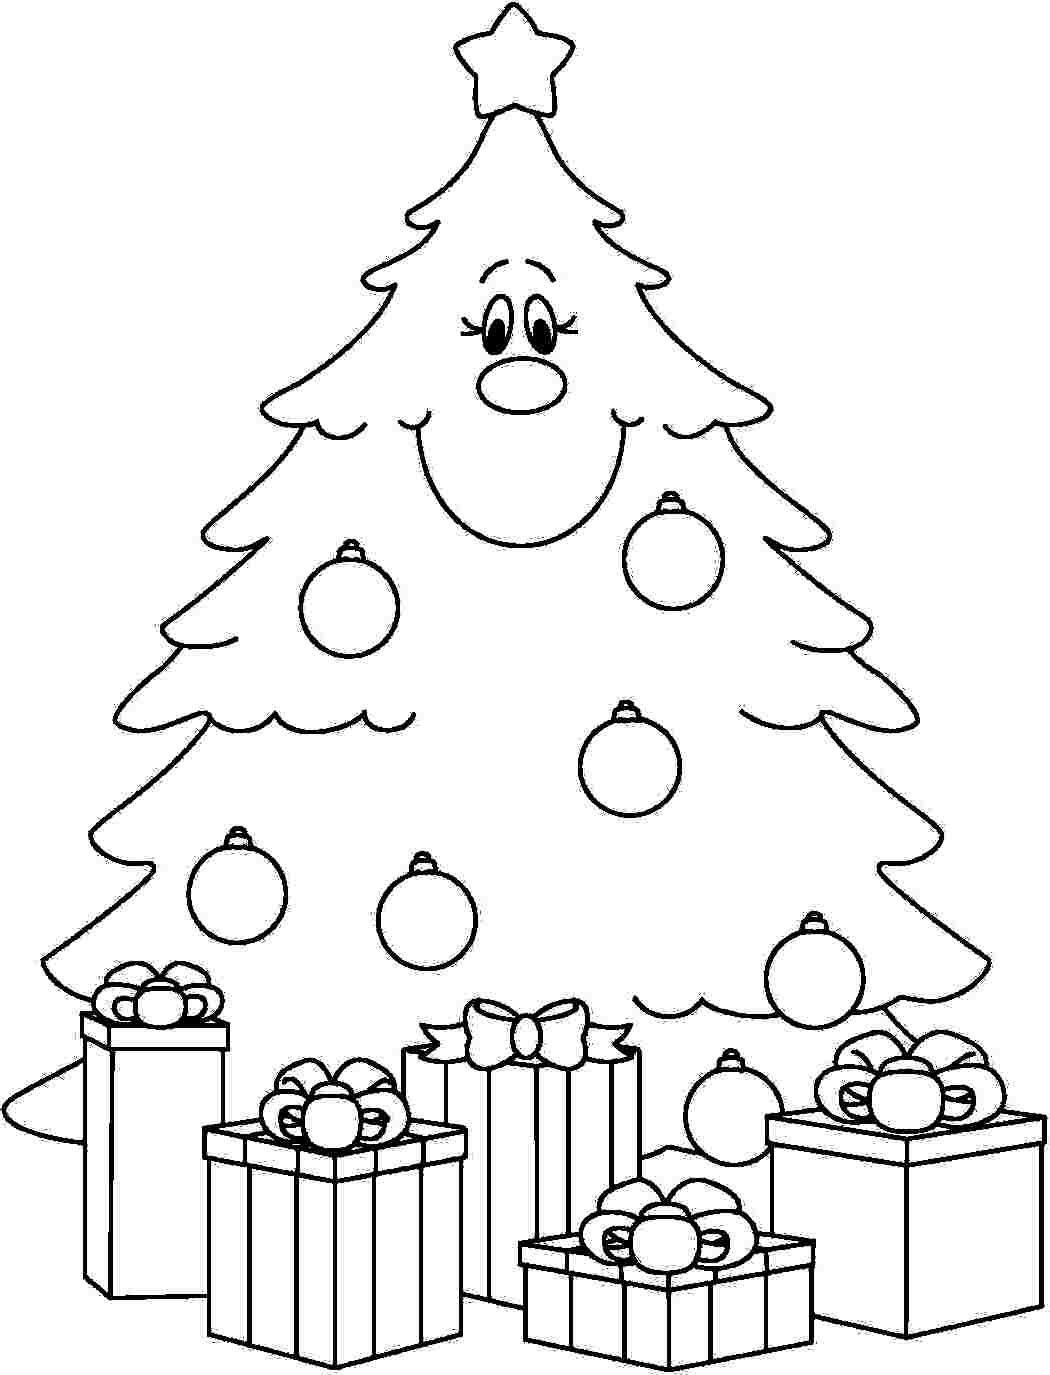 Christmas Tree Coloring Sheets For Kids
 Under the Christmas Tree EIT Digital